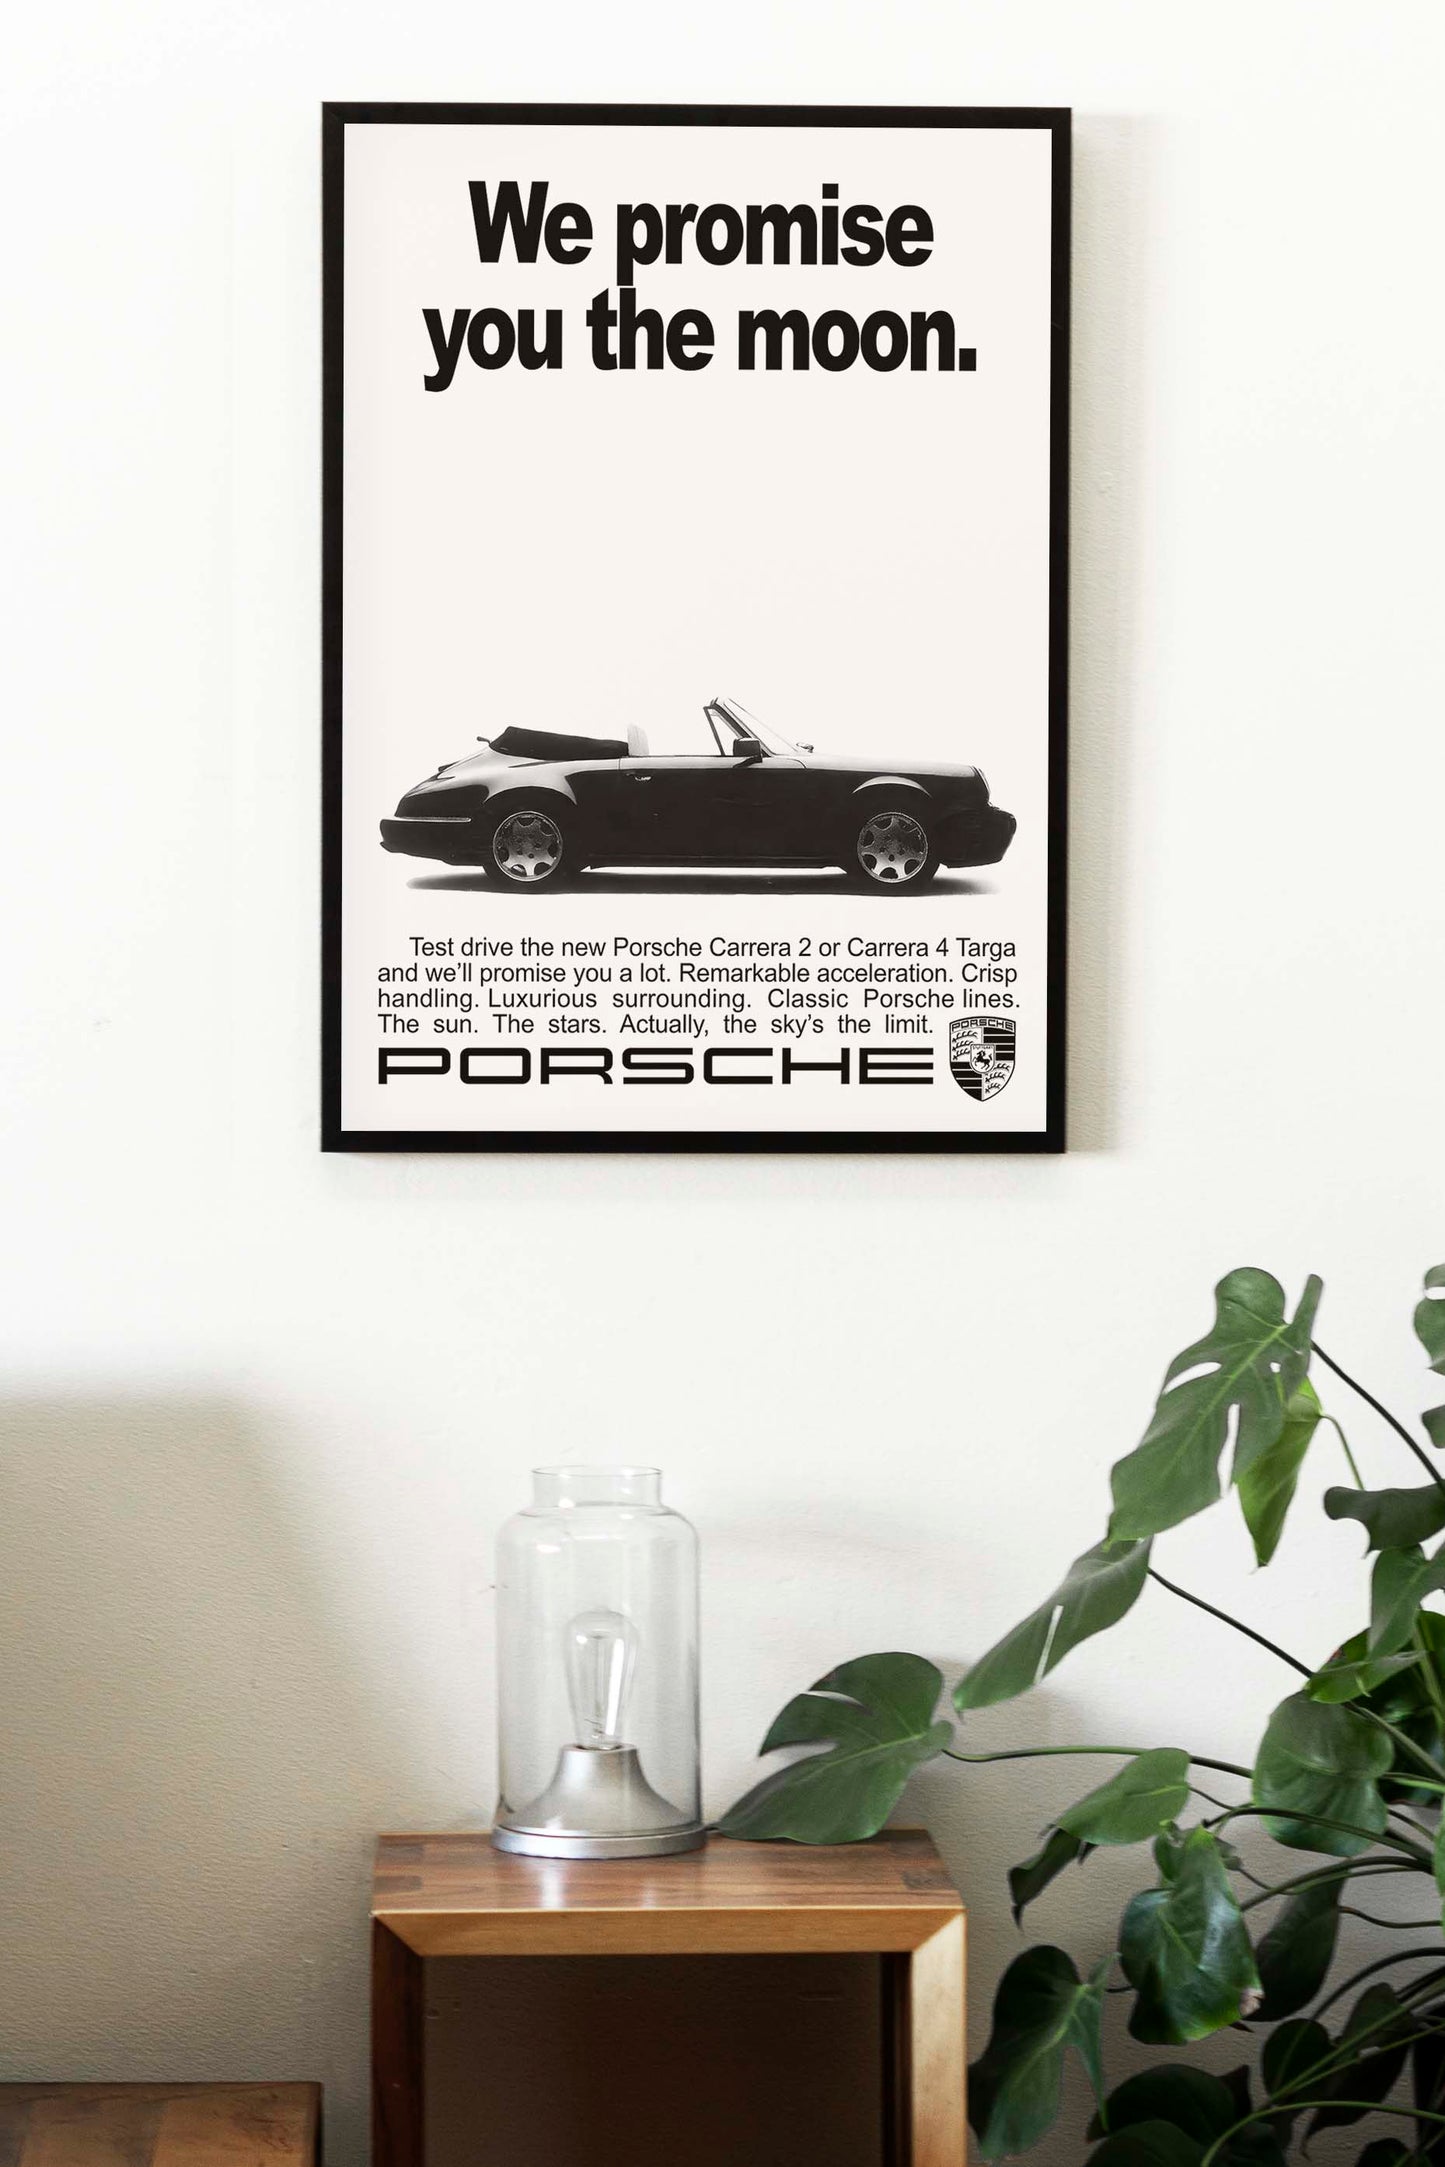 Porsche "We Promise You The Moon" Poster